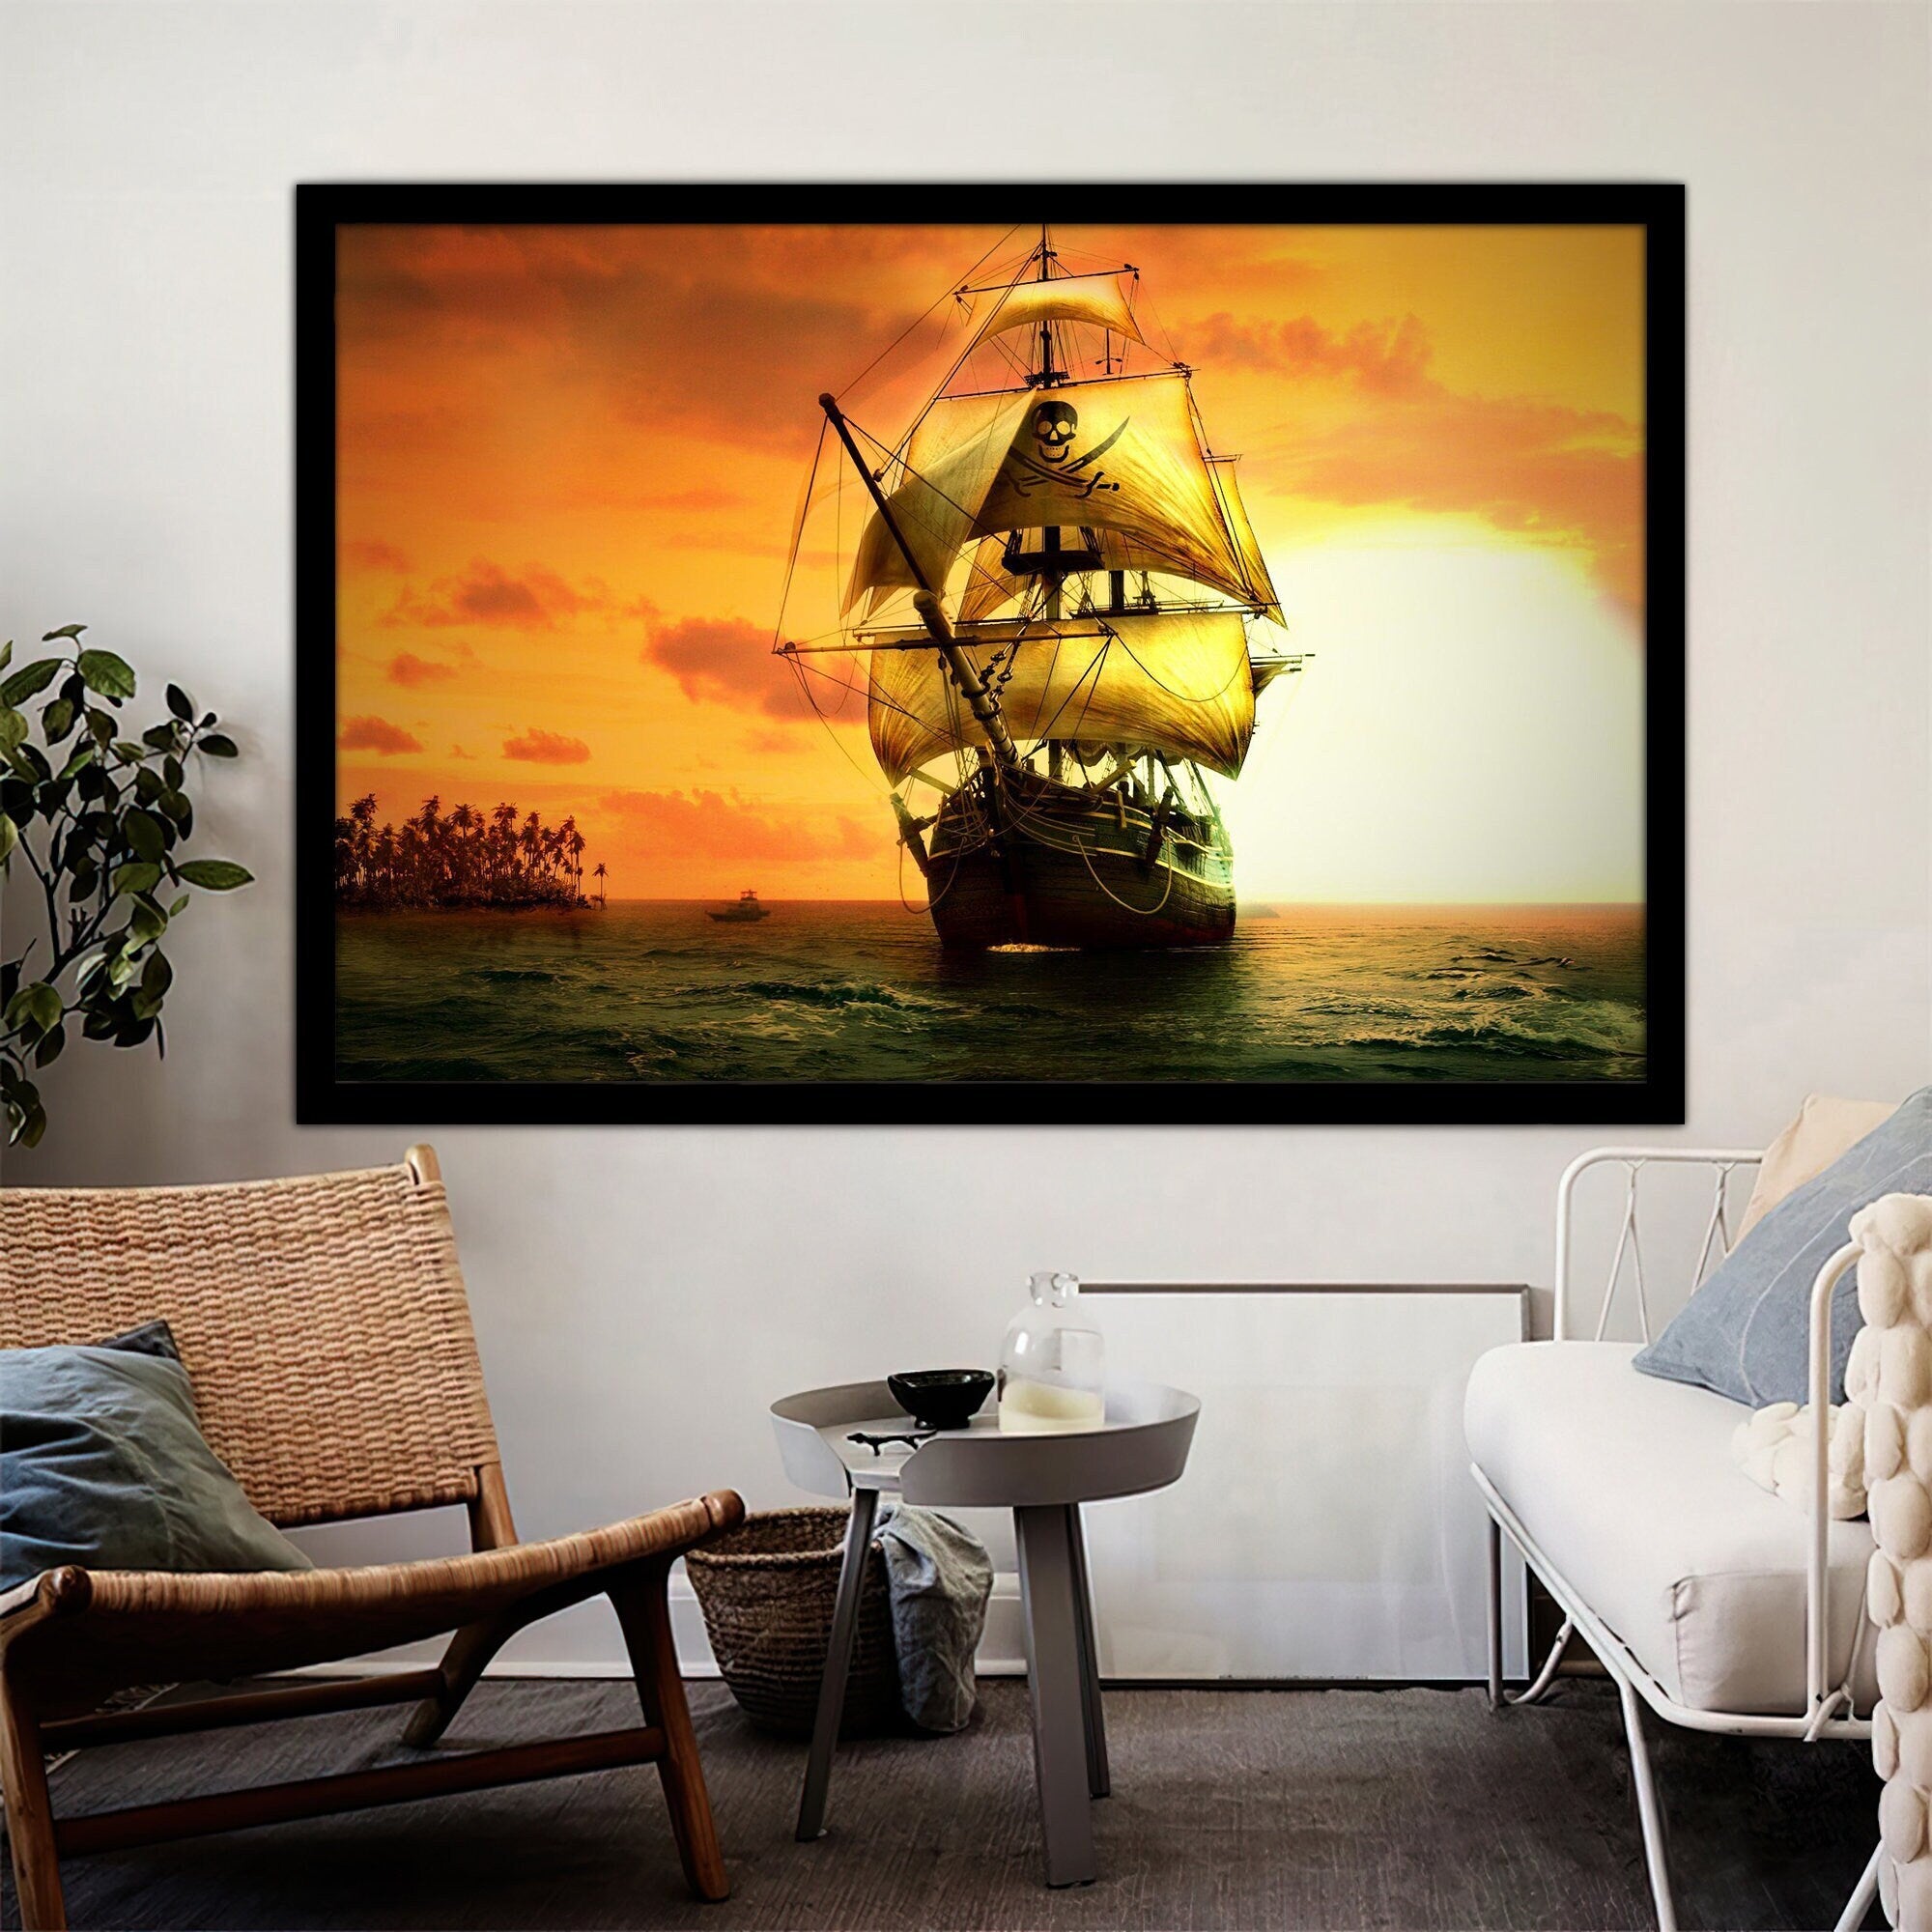 ship canvas painting, pirate ship painting, sailing painting, boating ship painting, rowing boat painting, ship framed canvas Decorative Art